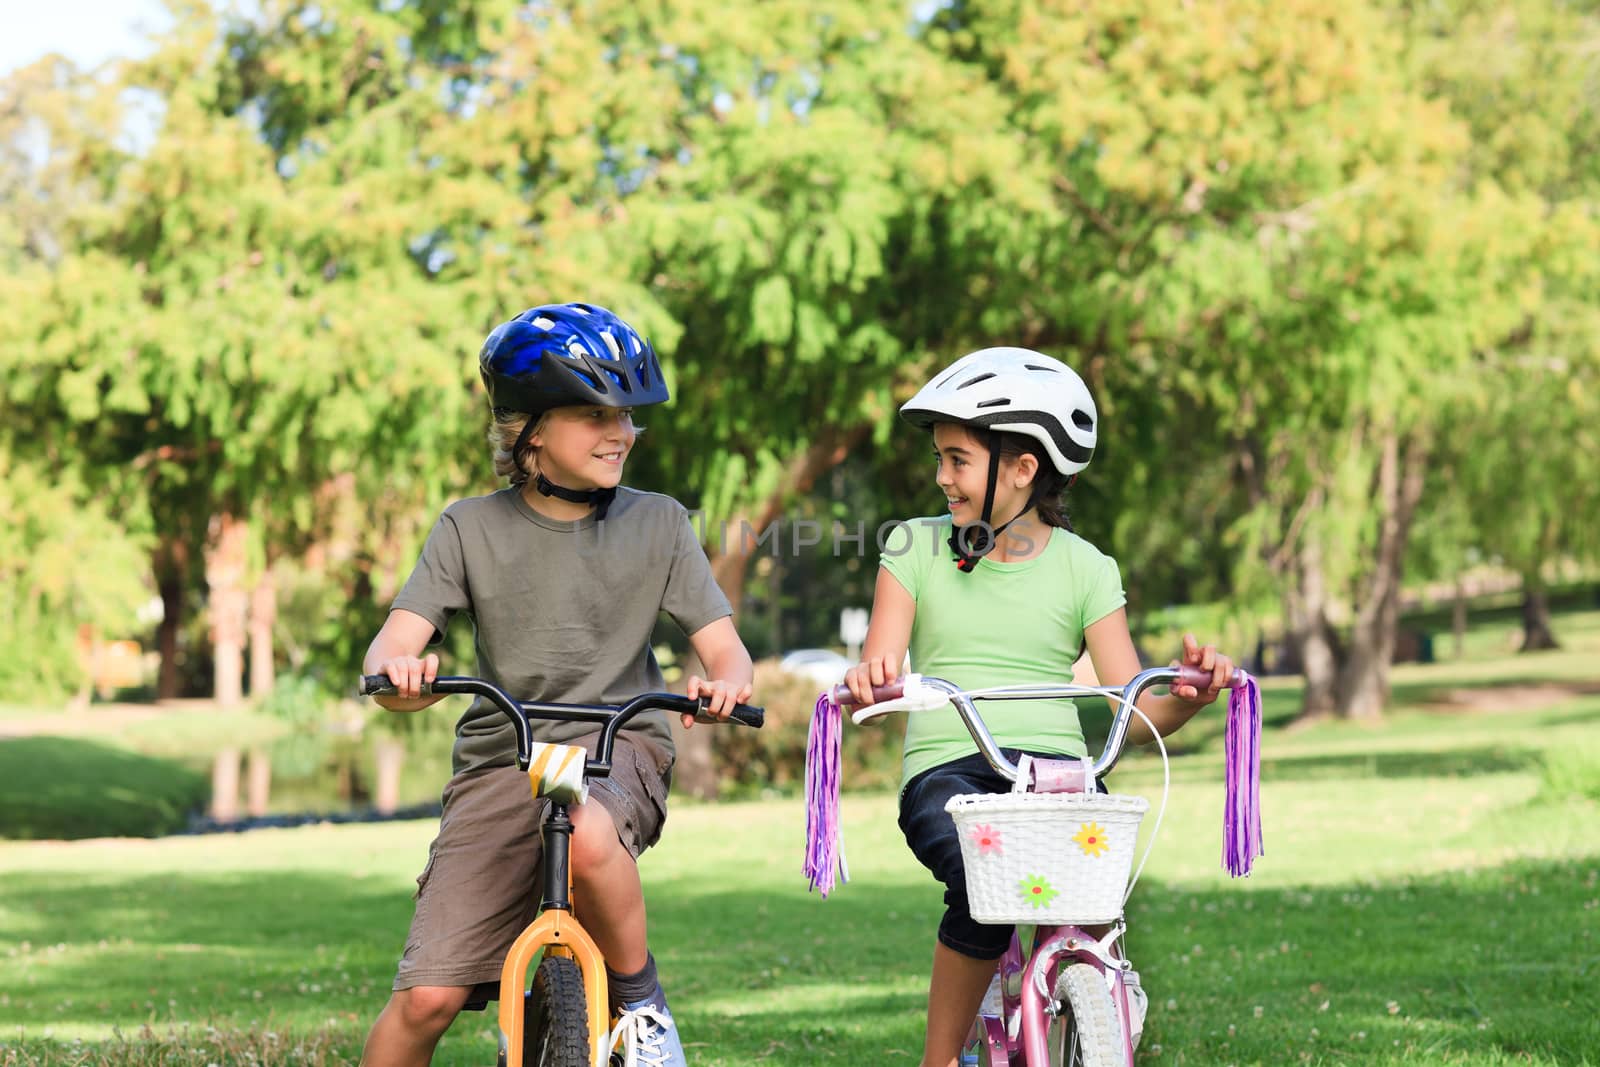 Brother and sister with their bikes in a park during the summer